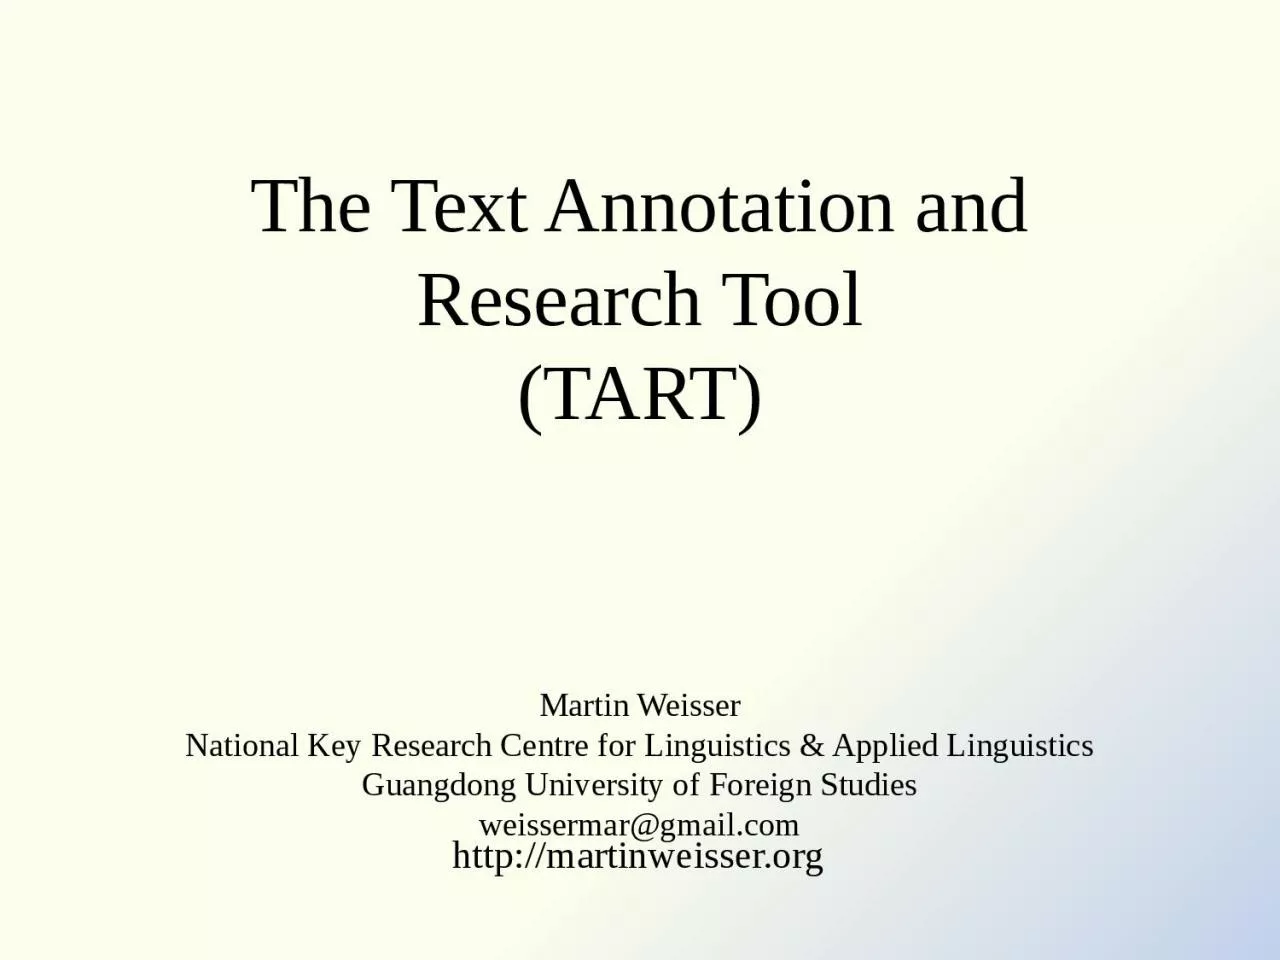 The Text Annotation and Research